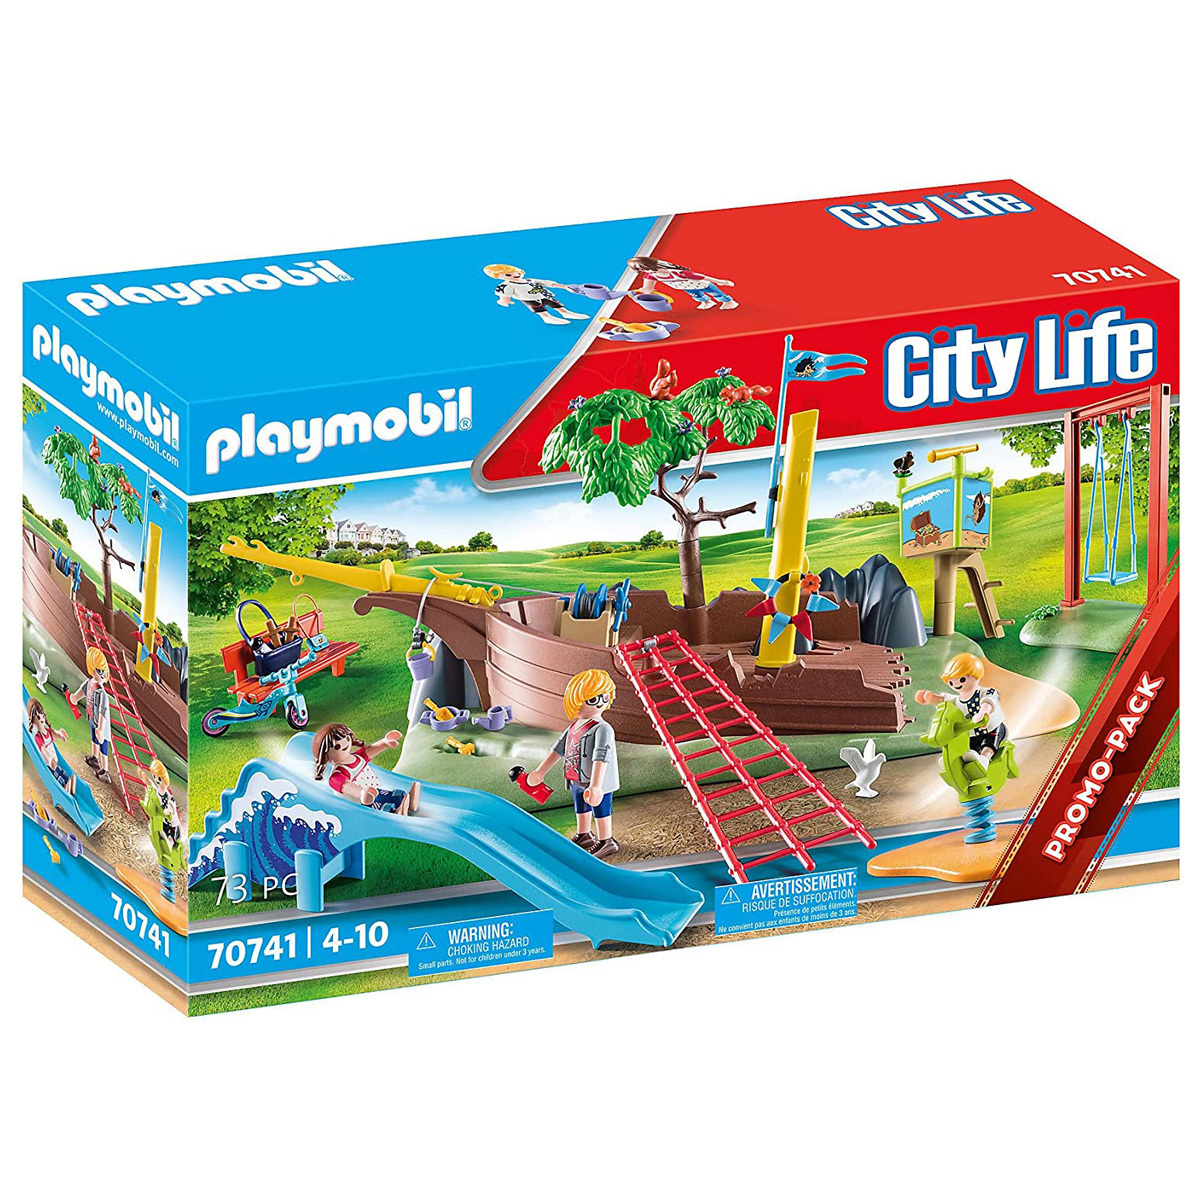 Playmobil City Life | The Entertainer